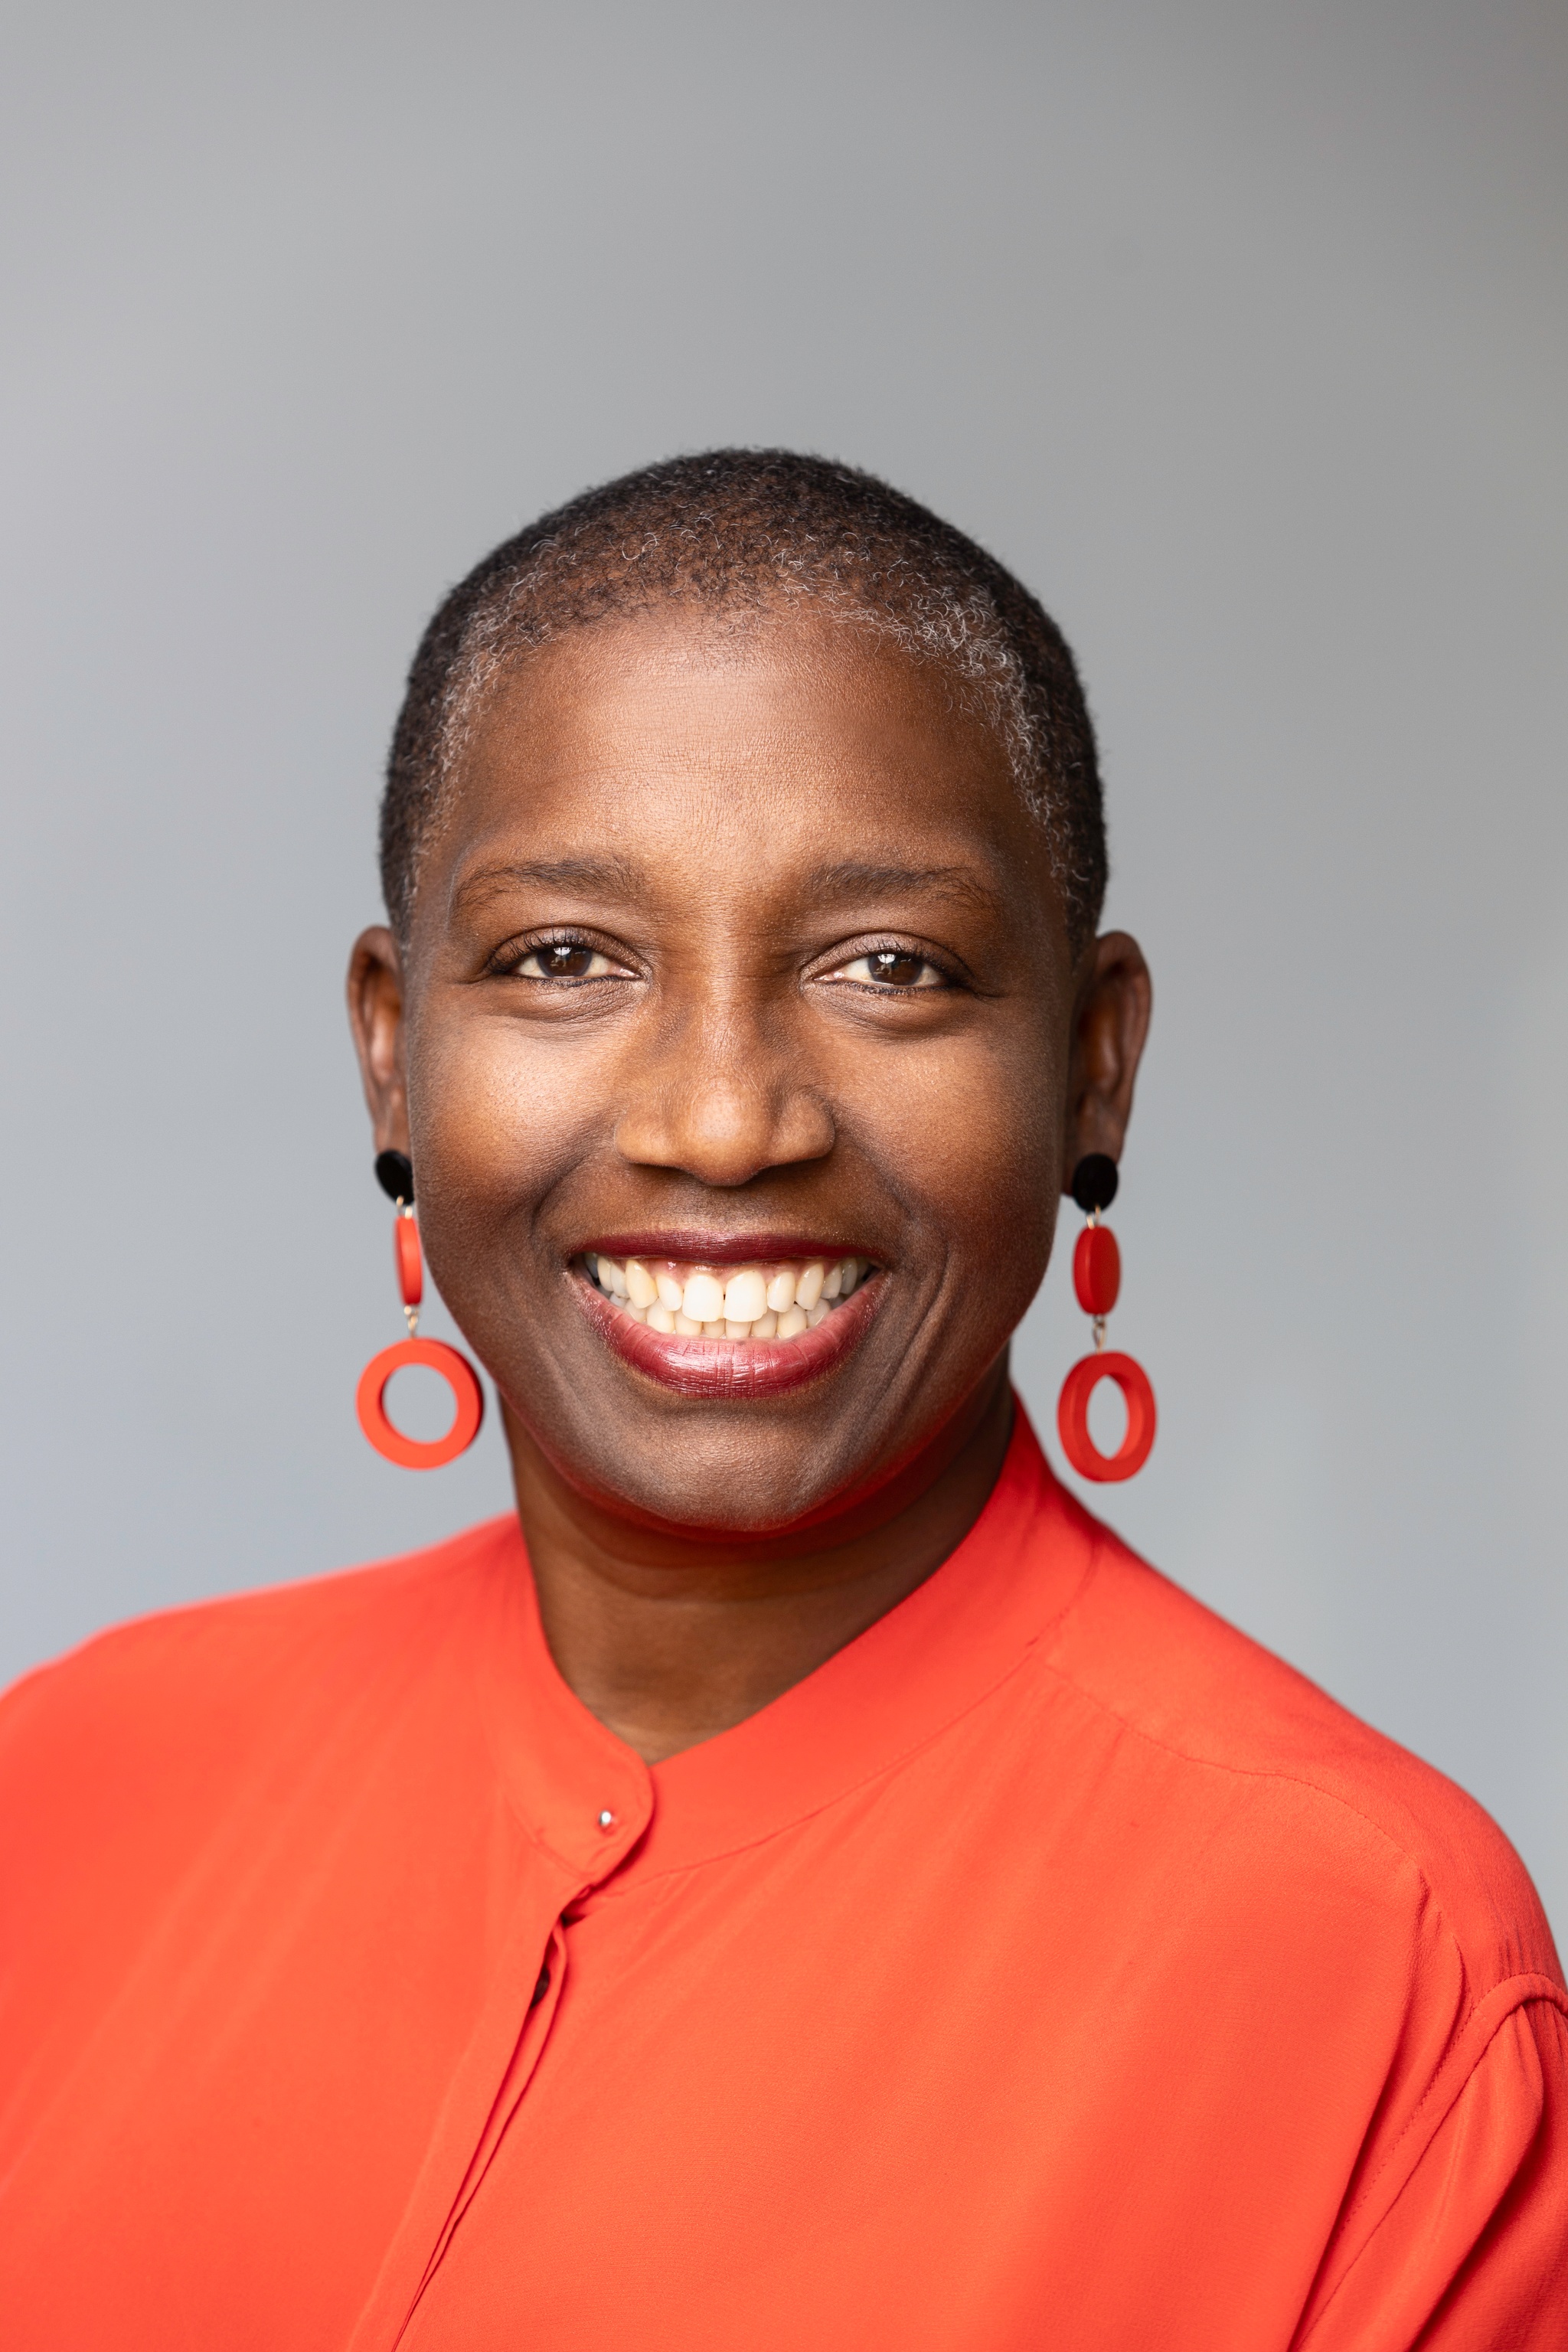 A portrait of Saundra Thomas, a Black woman with hair shaved to her head. She smiled broadly and looks directly at us. She wears dangling orange earrings that match her orange blouse. 